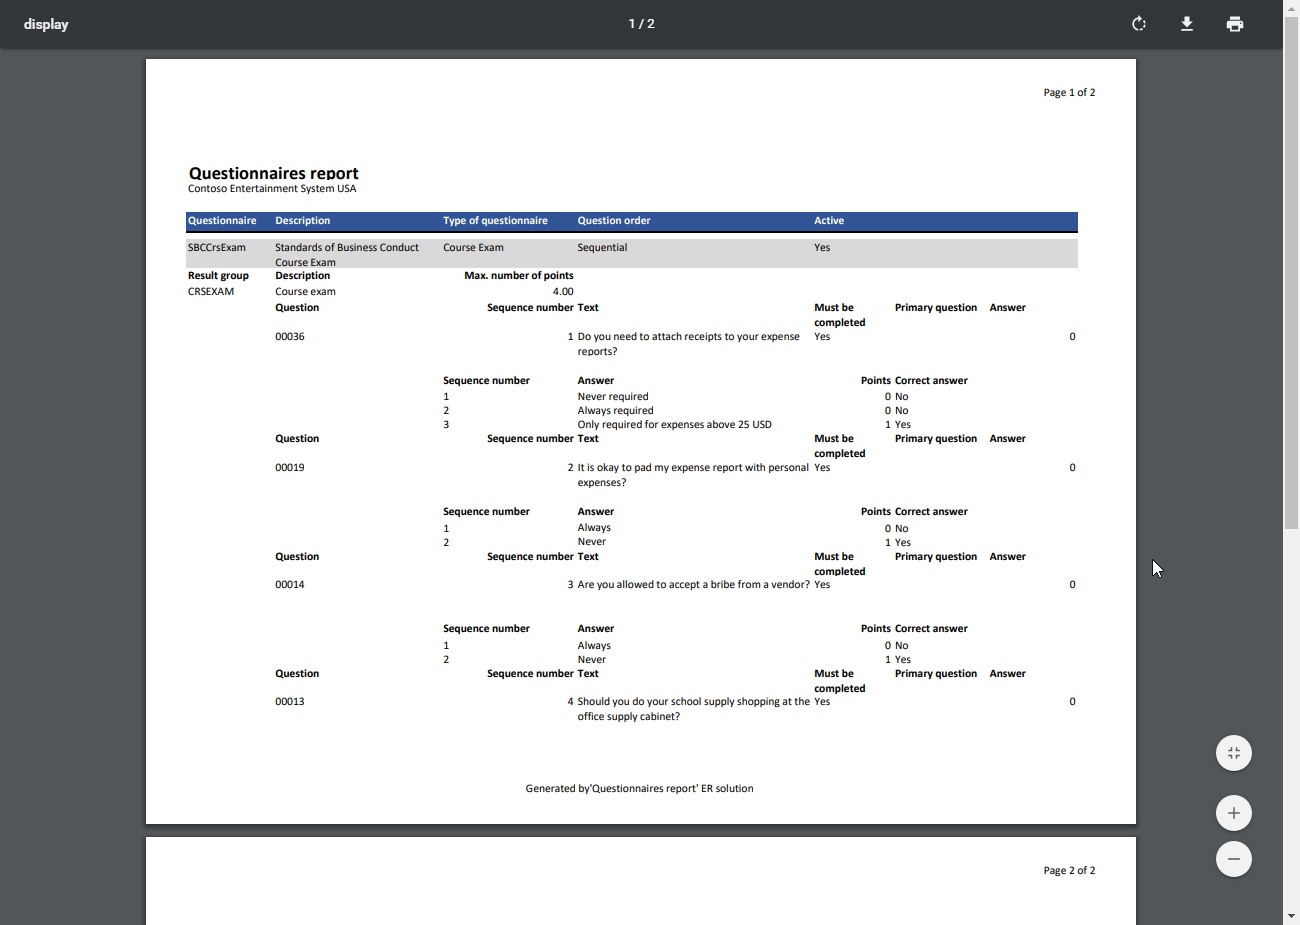 On-screen preview of the generated report in PDF format.